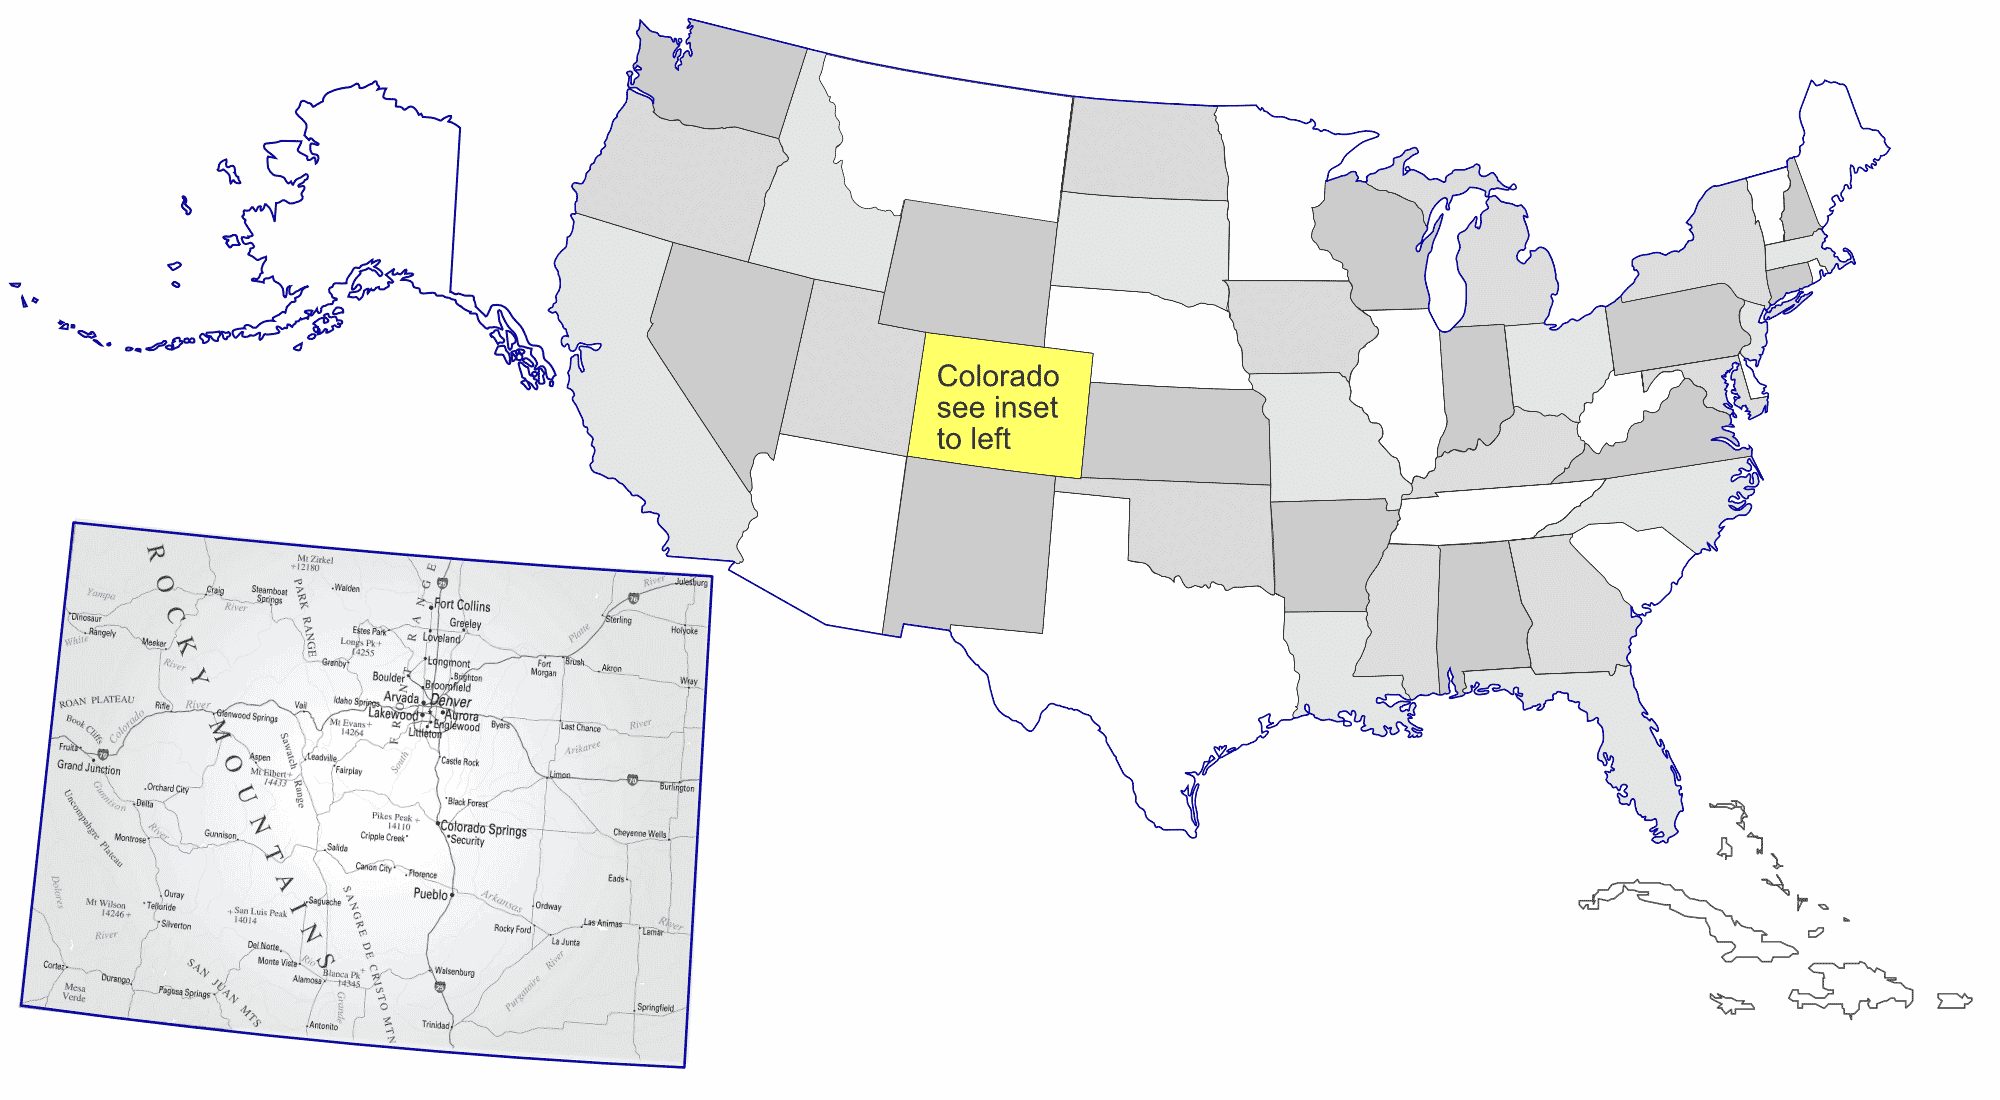 a map of the United States with an inset map of colorado, into which pins are placed to indicate the places in which Weiner & Cording have won significant cases